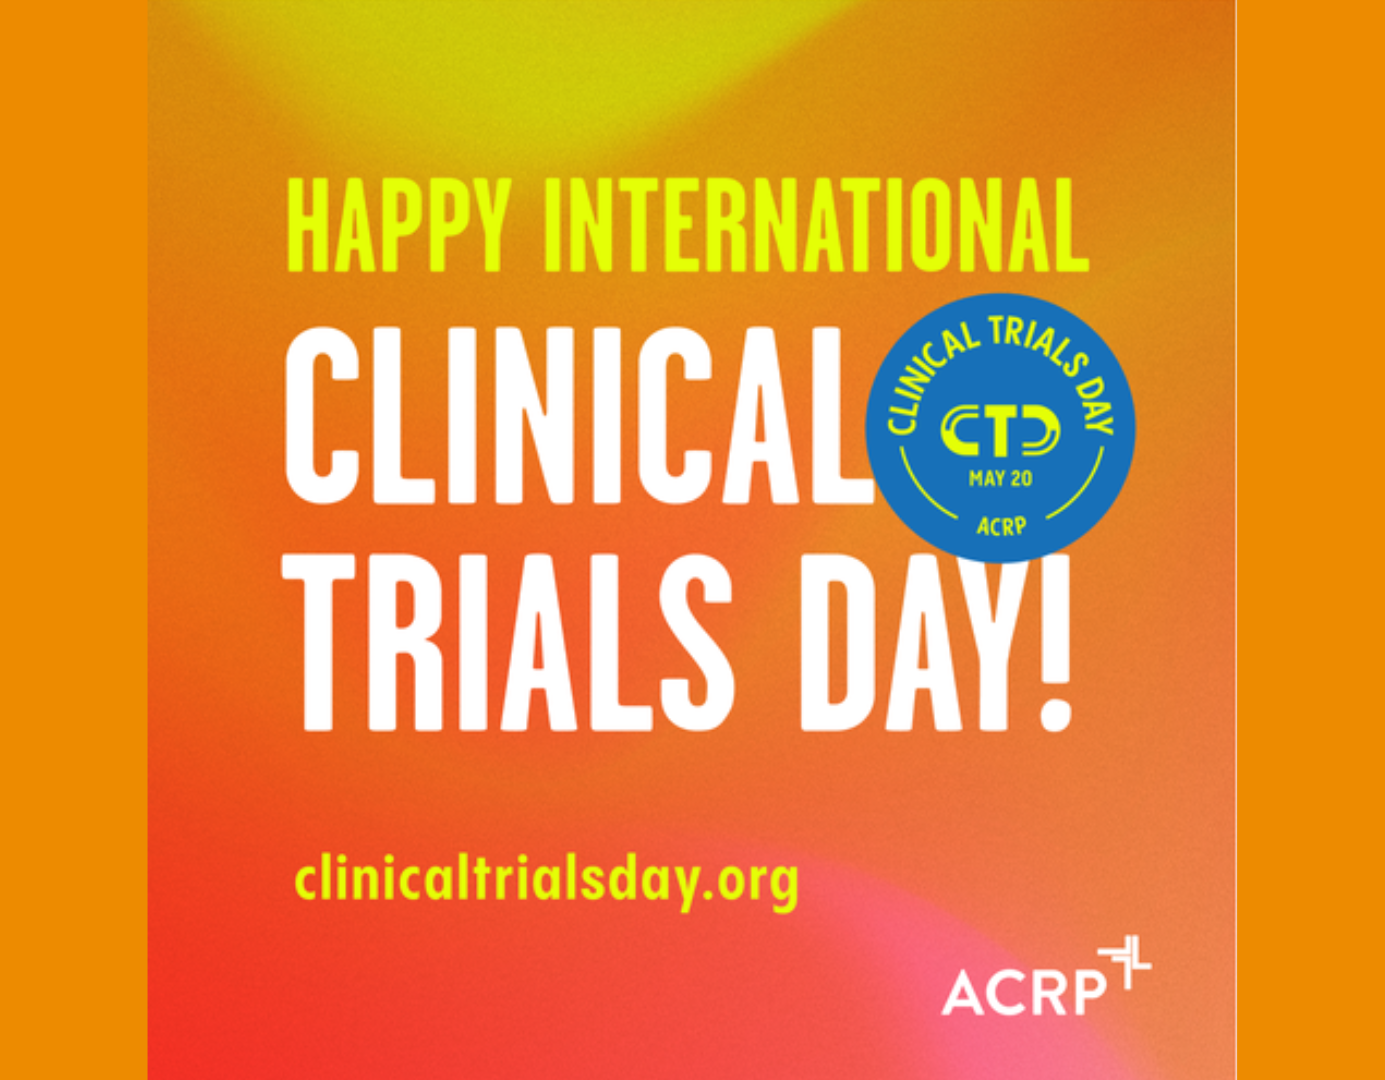 Orange background with text Happy International Clinical Trials Day. Symbol for ACRP. clinicaltrialsday.org